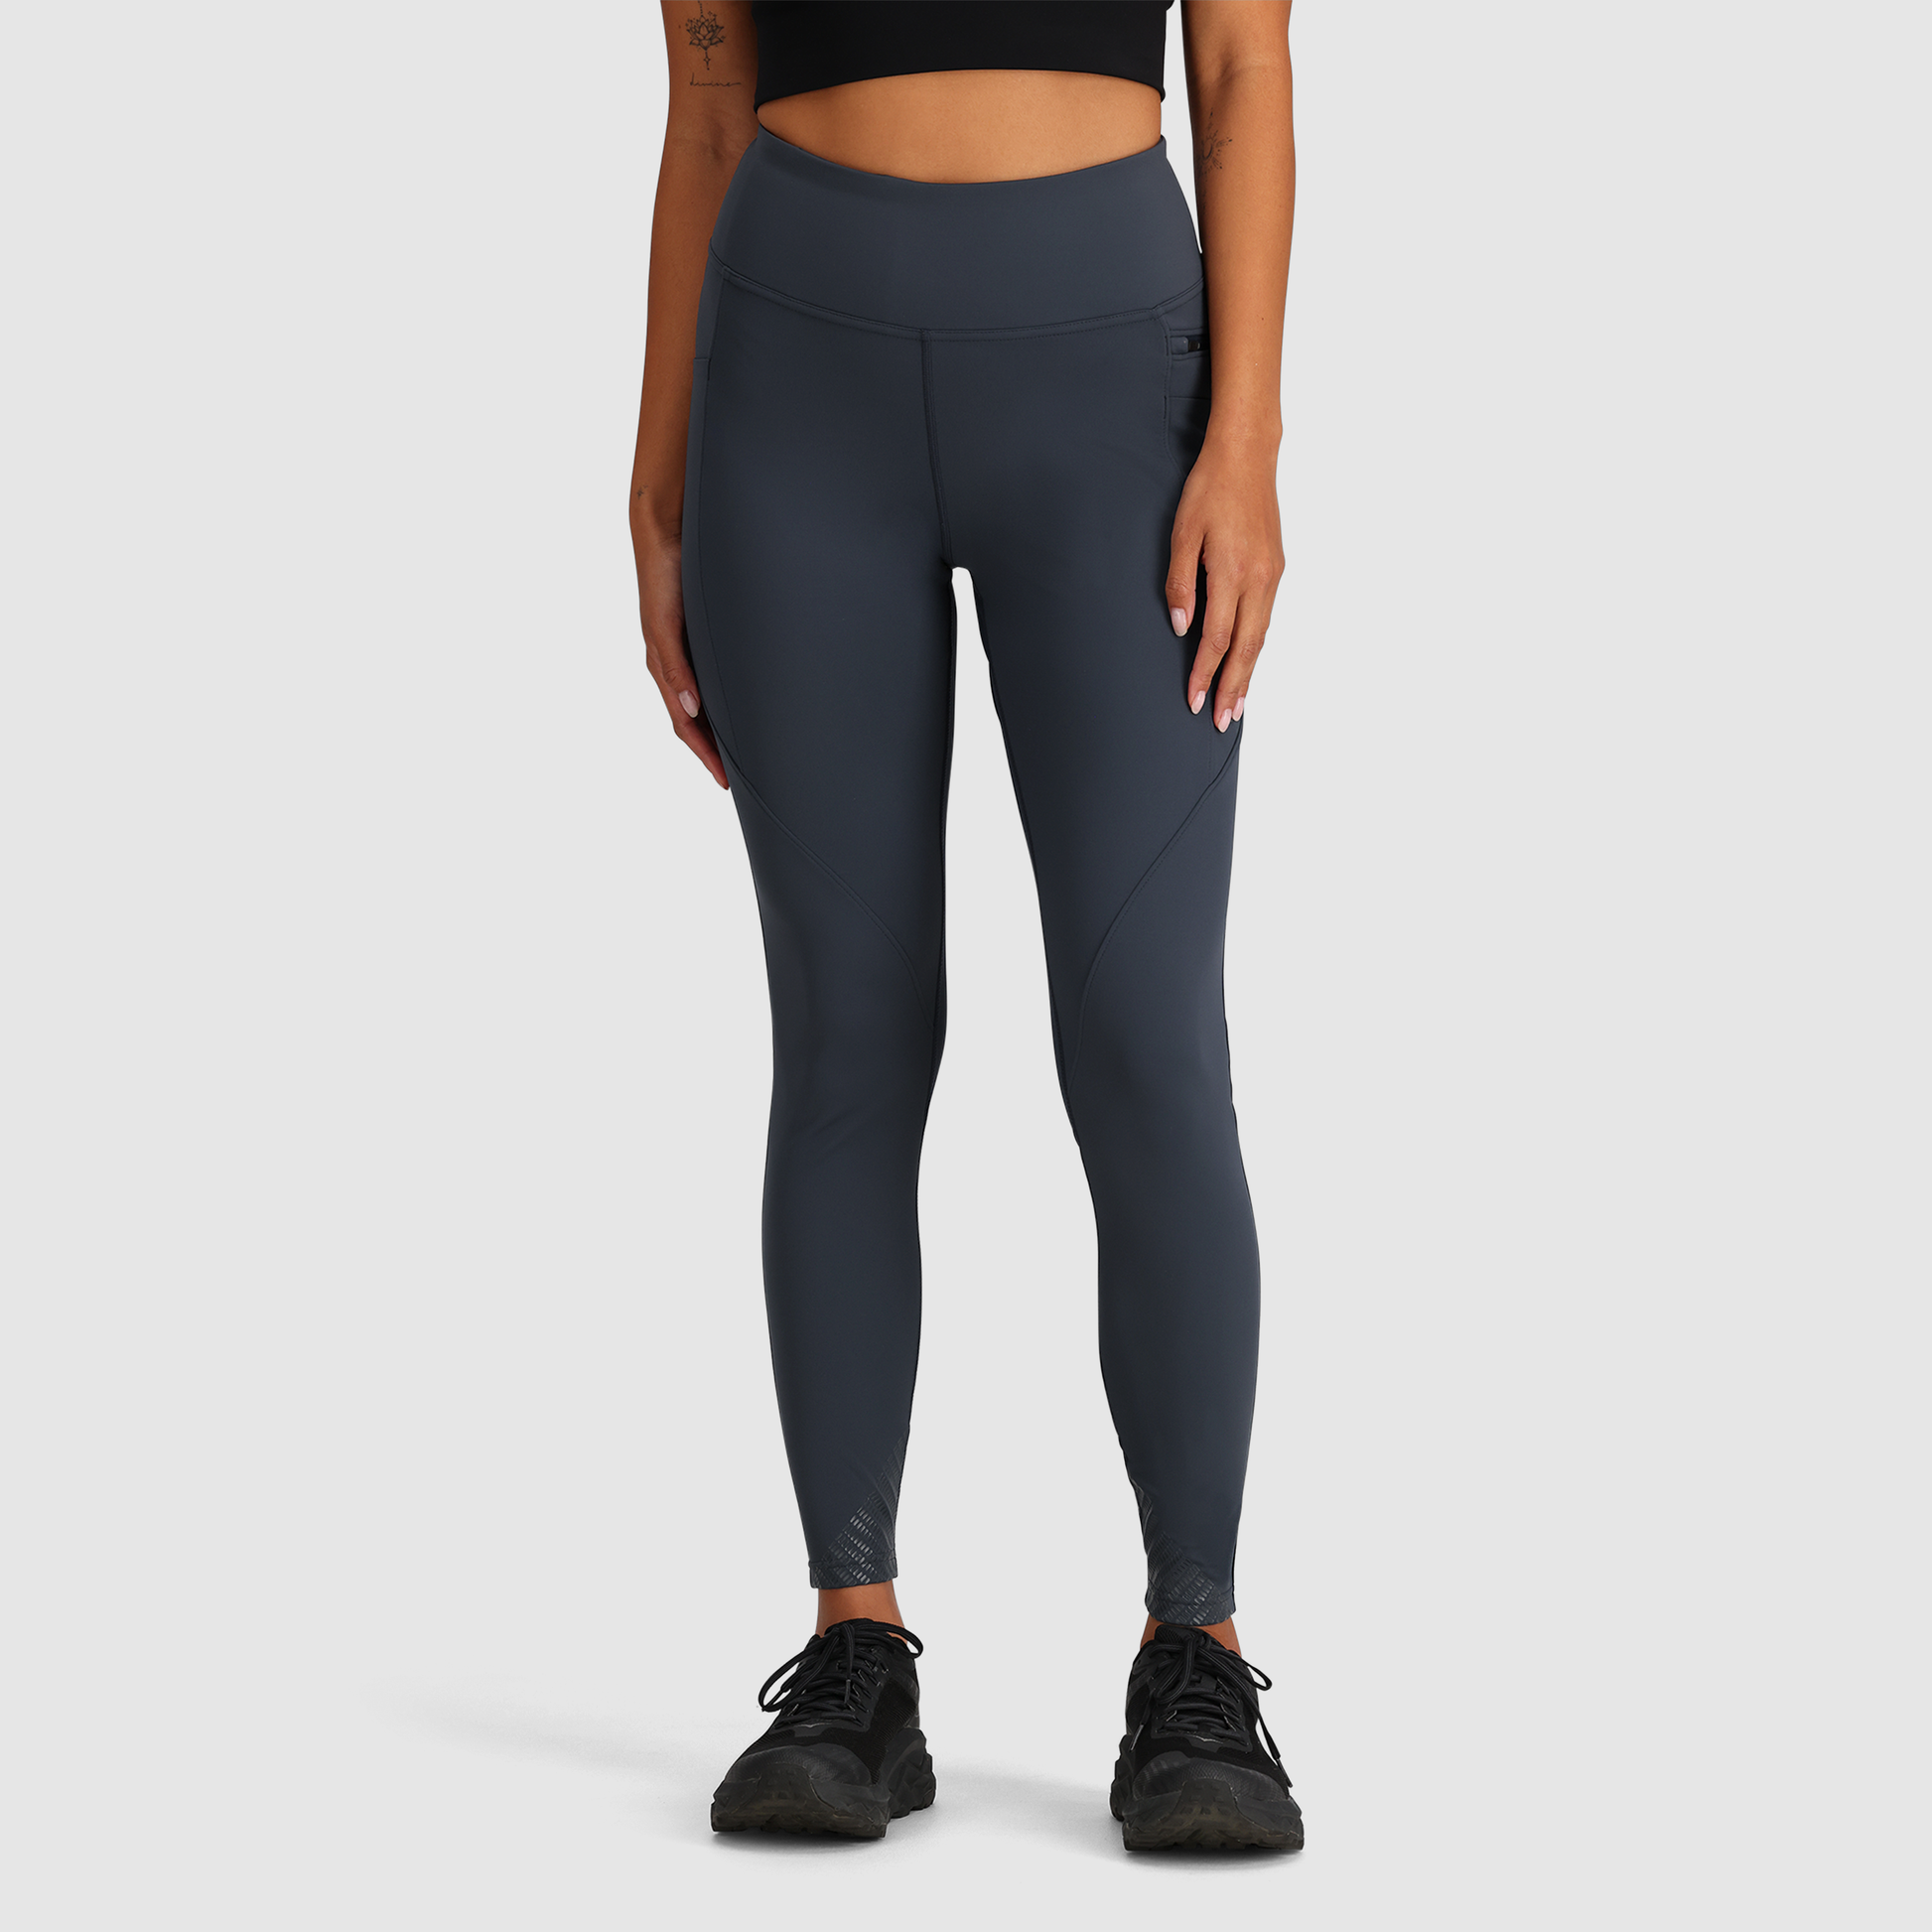 Stay Warm and Stylish with NIKE Pro Warm Women's Tights